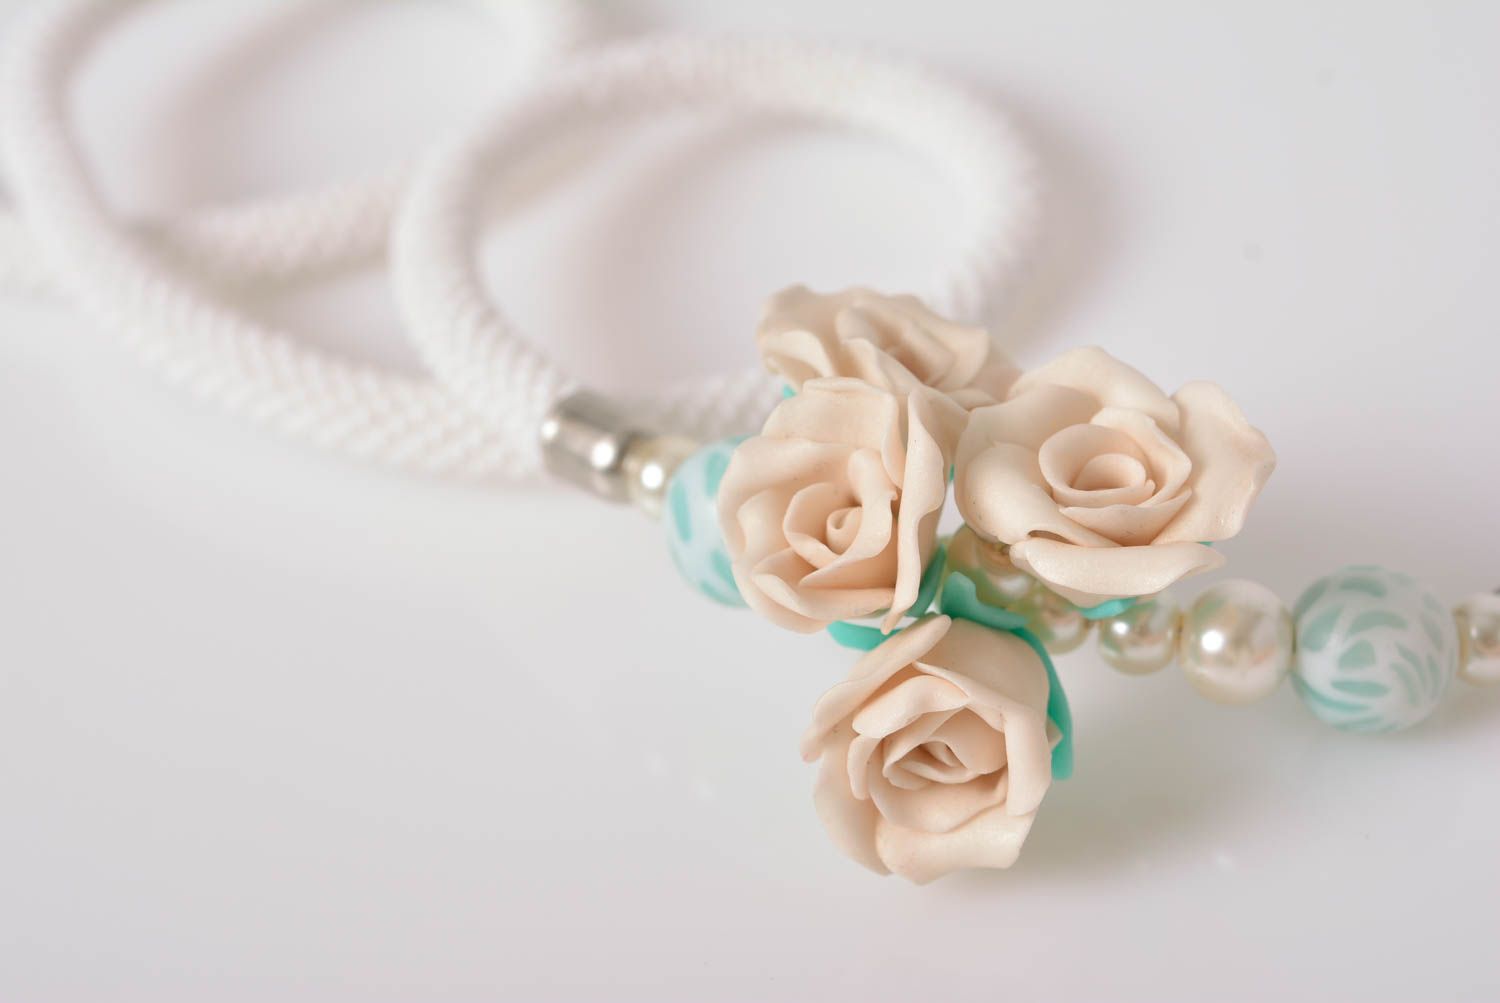 Fancy bracelet with flowers made of polymer clay handmade accessory photo 2